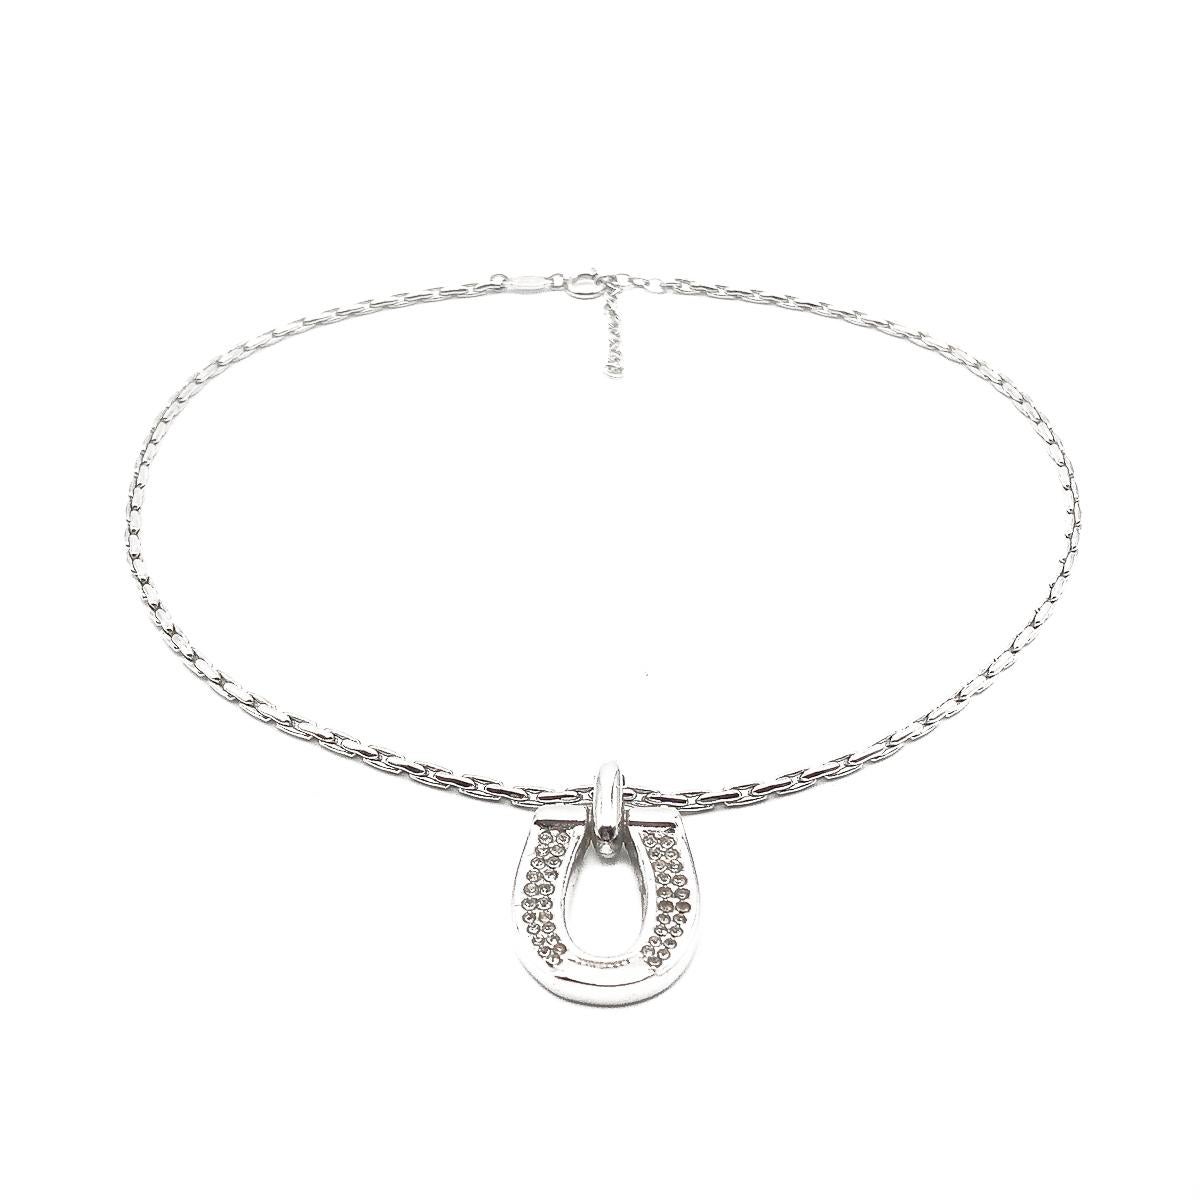 A vintage Dior Horseshoe necklace. Featuring a crystal set horseshoe on a fancy chain.
Vintage Condition: Very good without damage or noteworthy wear. 
Materials: Rhodium plated metal, glass crystals
Signed: Dior
Fastening: Bolt ring
Approximate